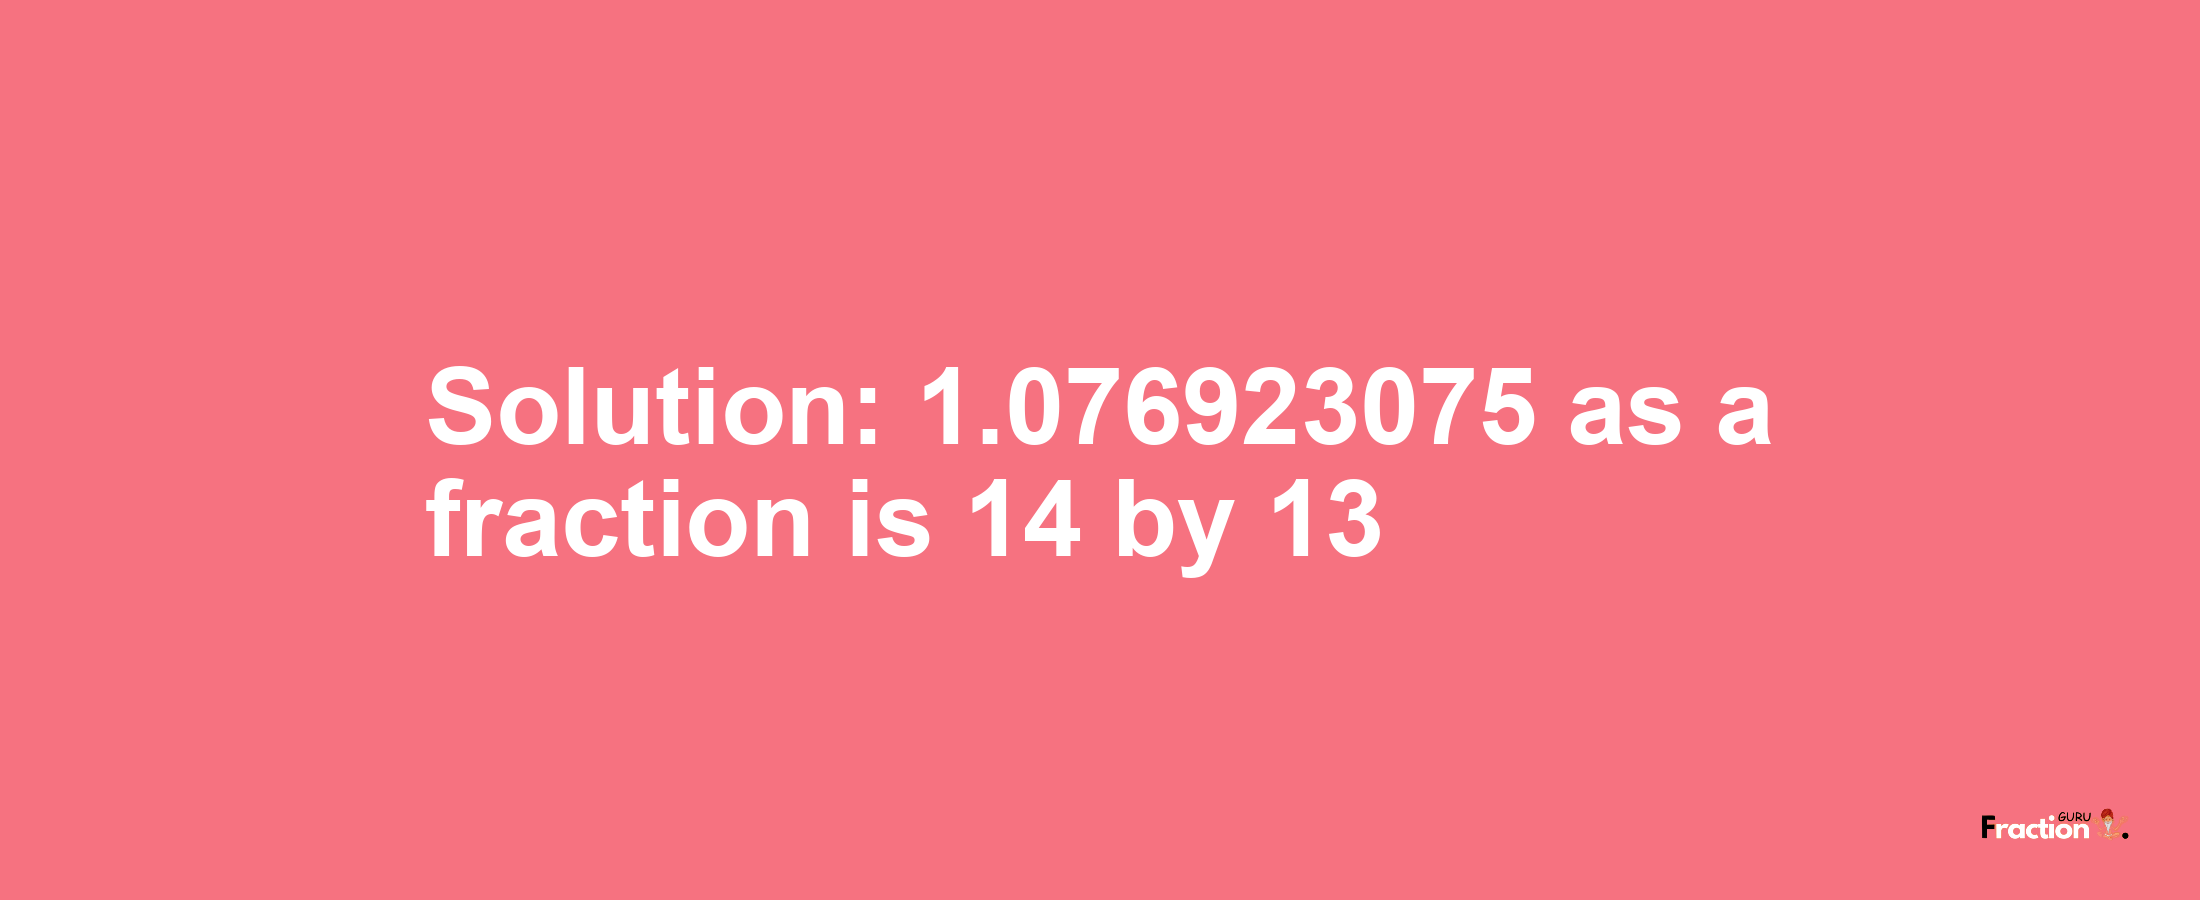 Solution:1.076923075 as a fraction is 14/13